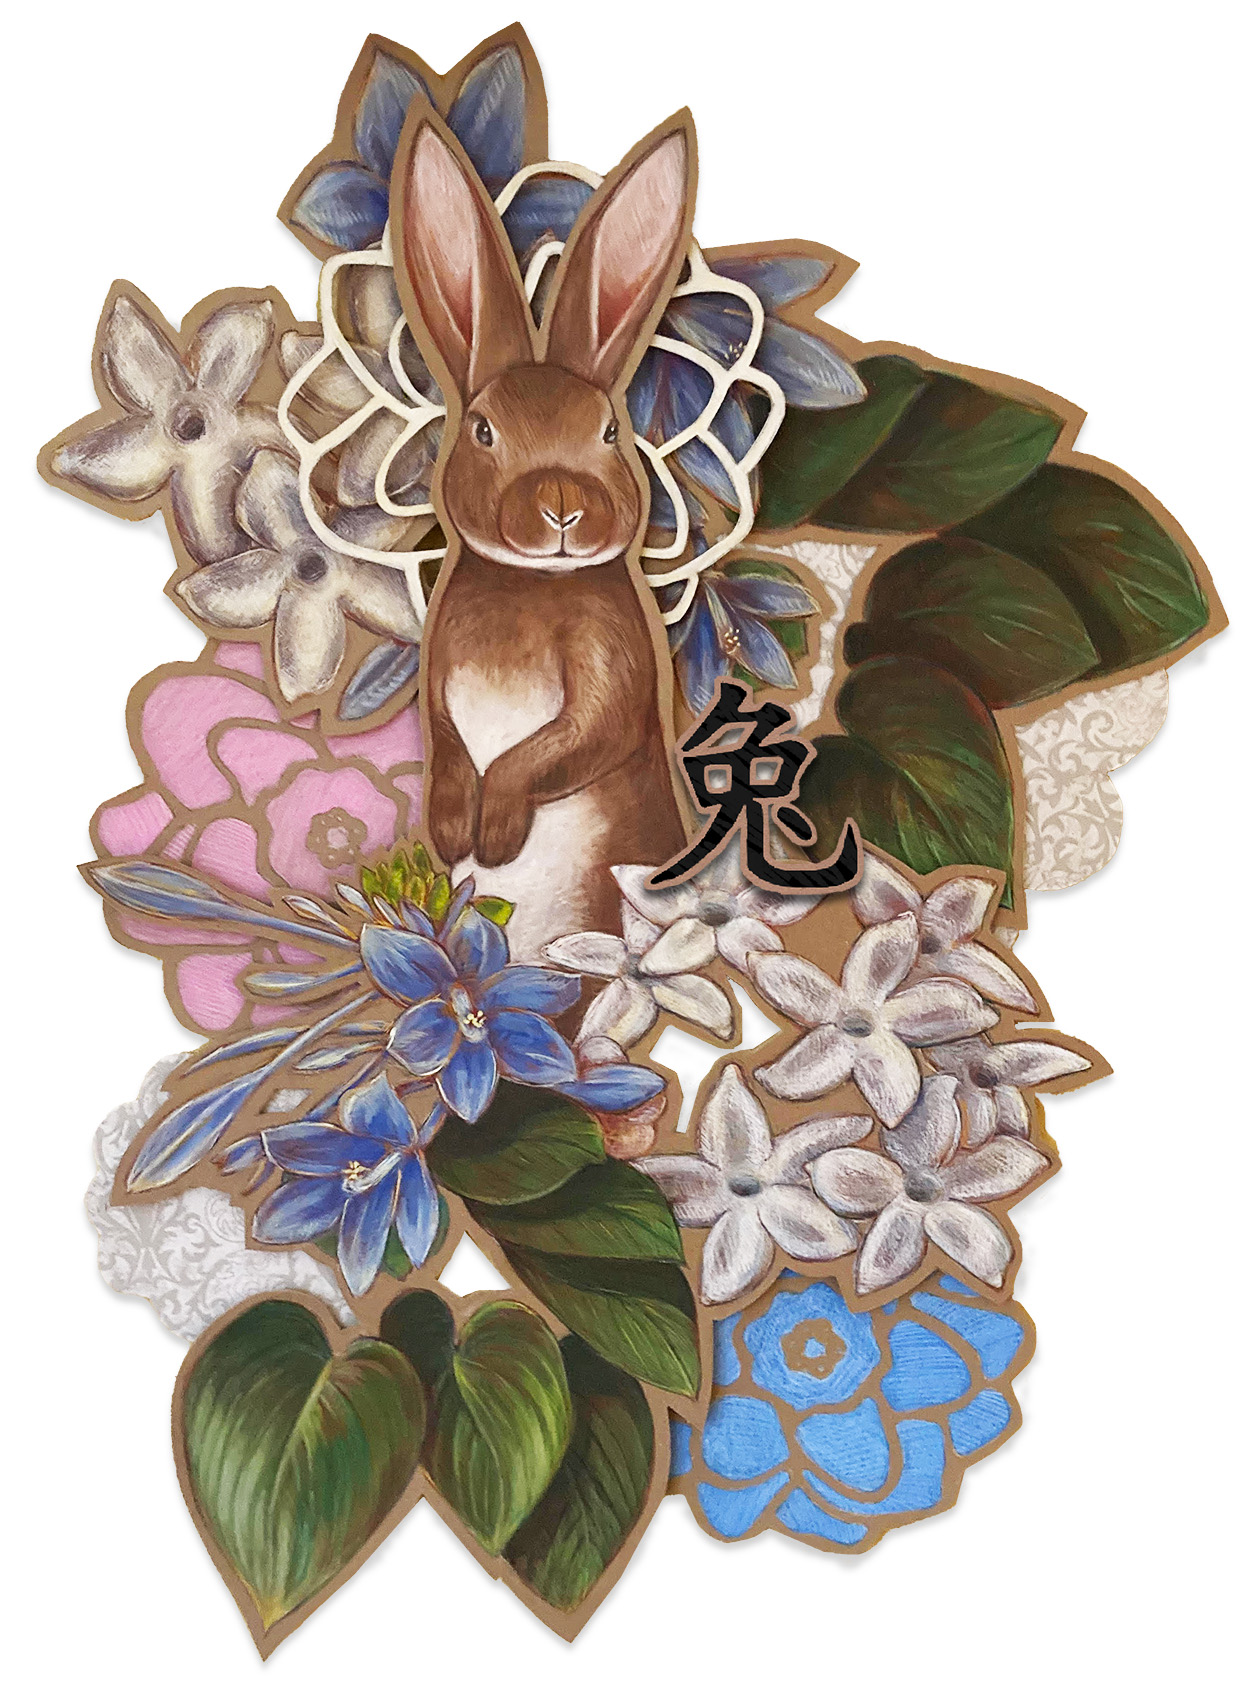 Mixed media artwork entitled Year of the Rabbit. A rabbit sitting in an arrangement of pink, blue and white flowers.